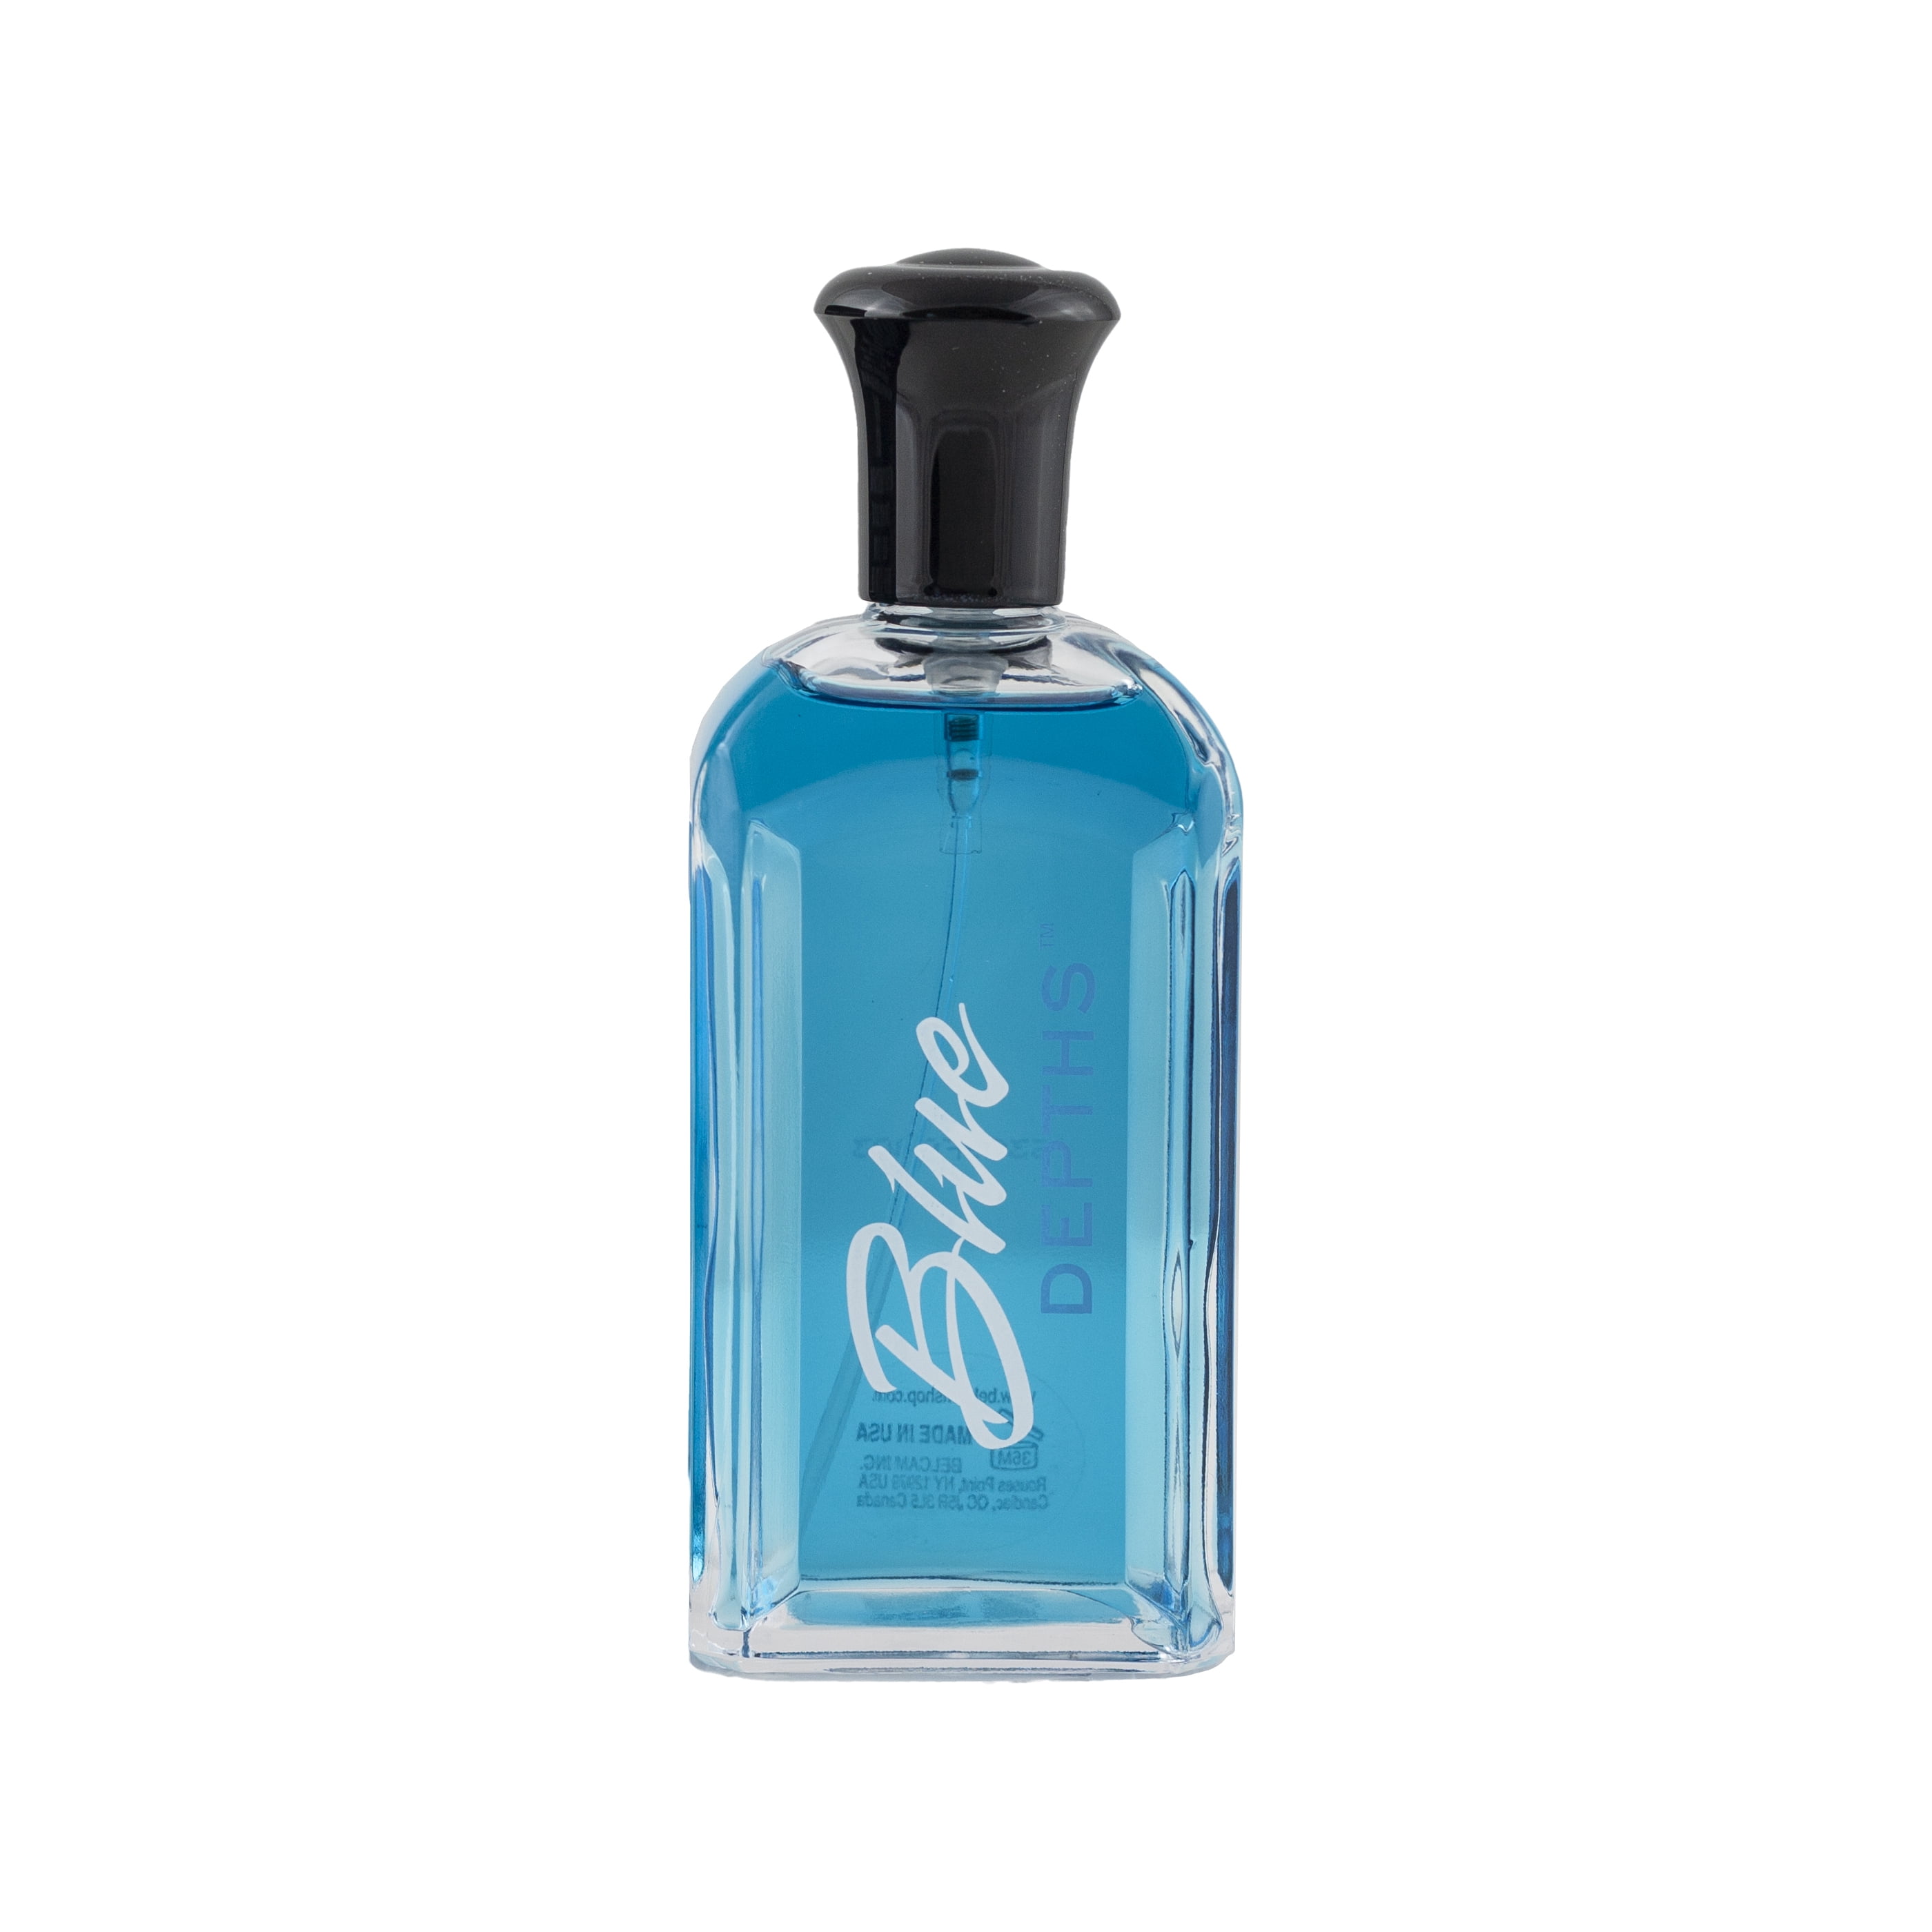 Understand and buy blue depths cologne walmart cheap online